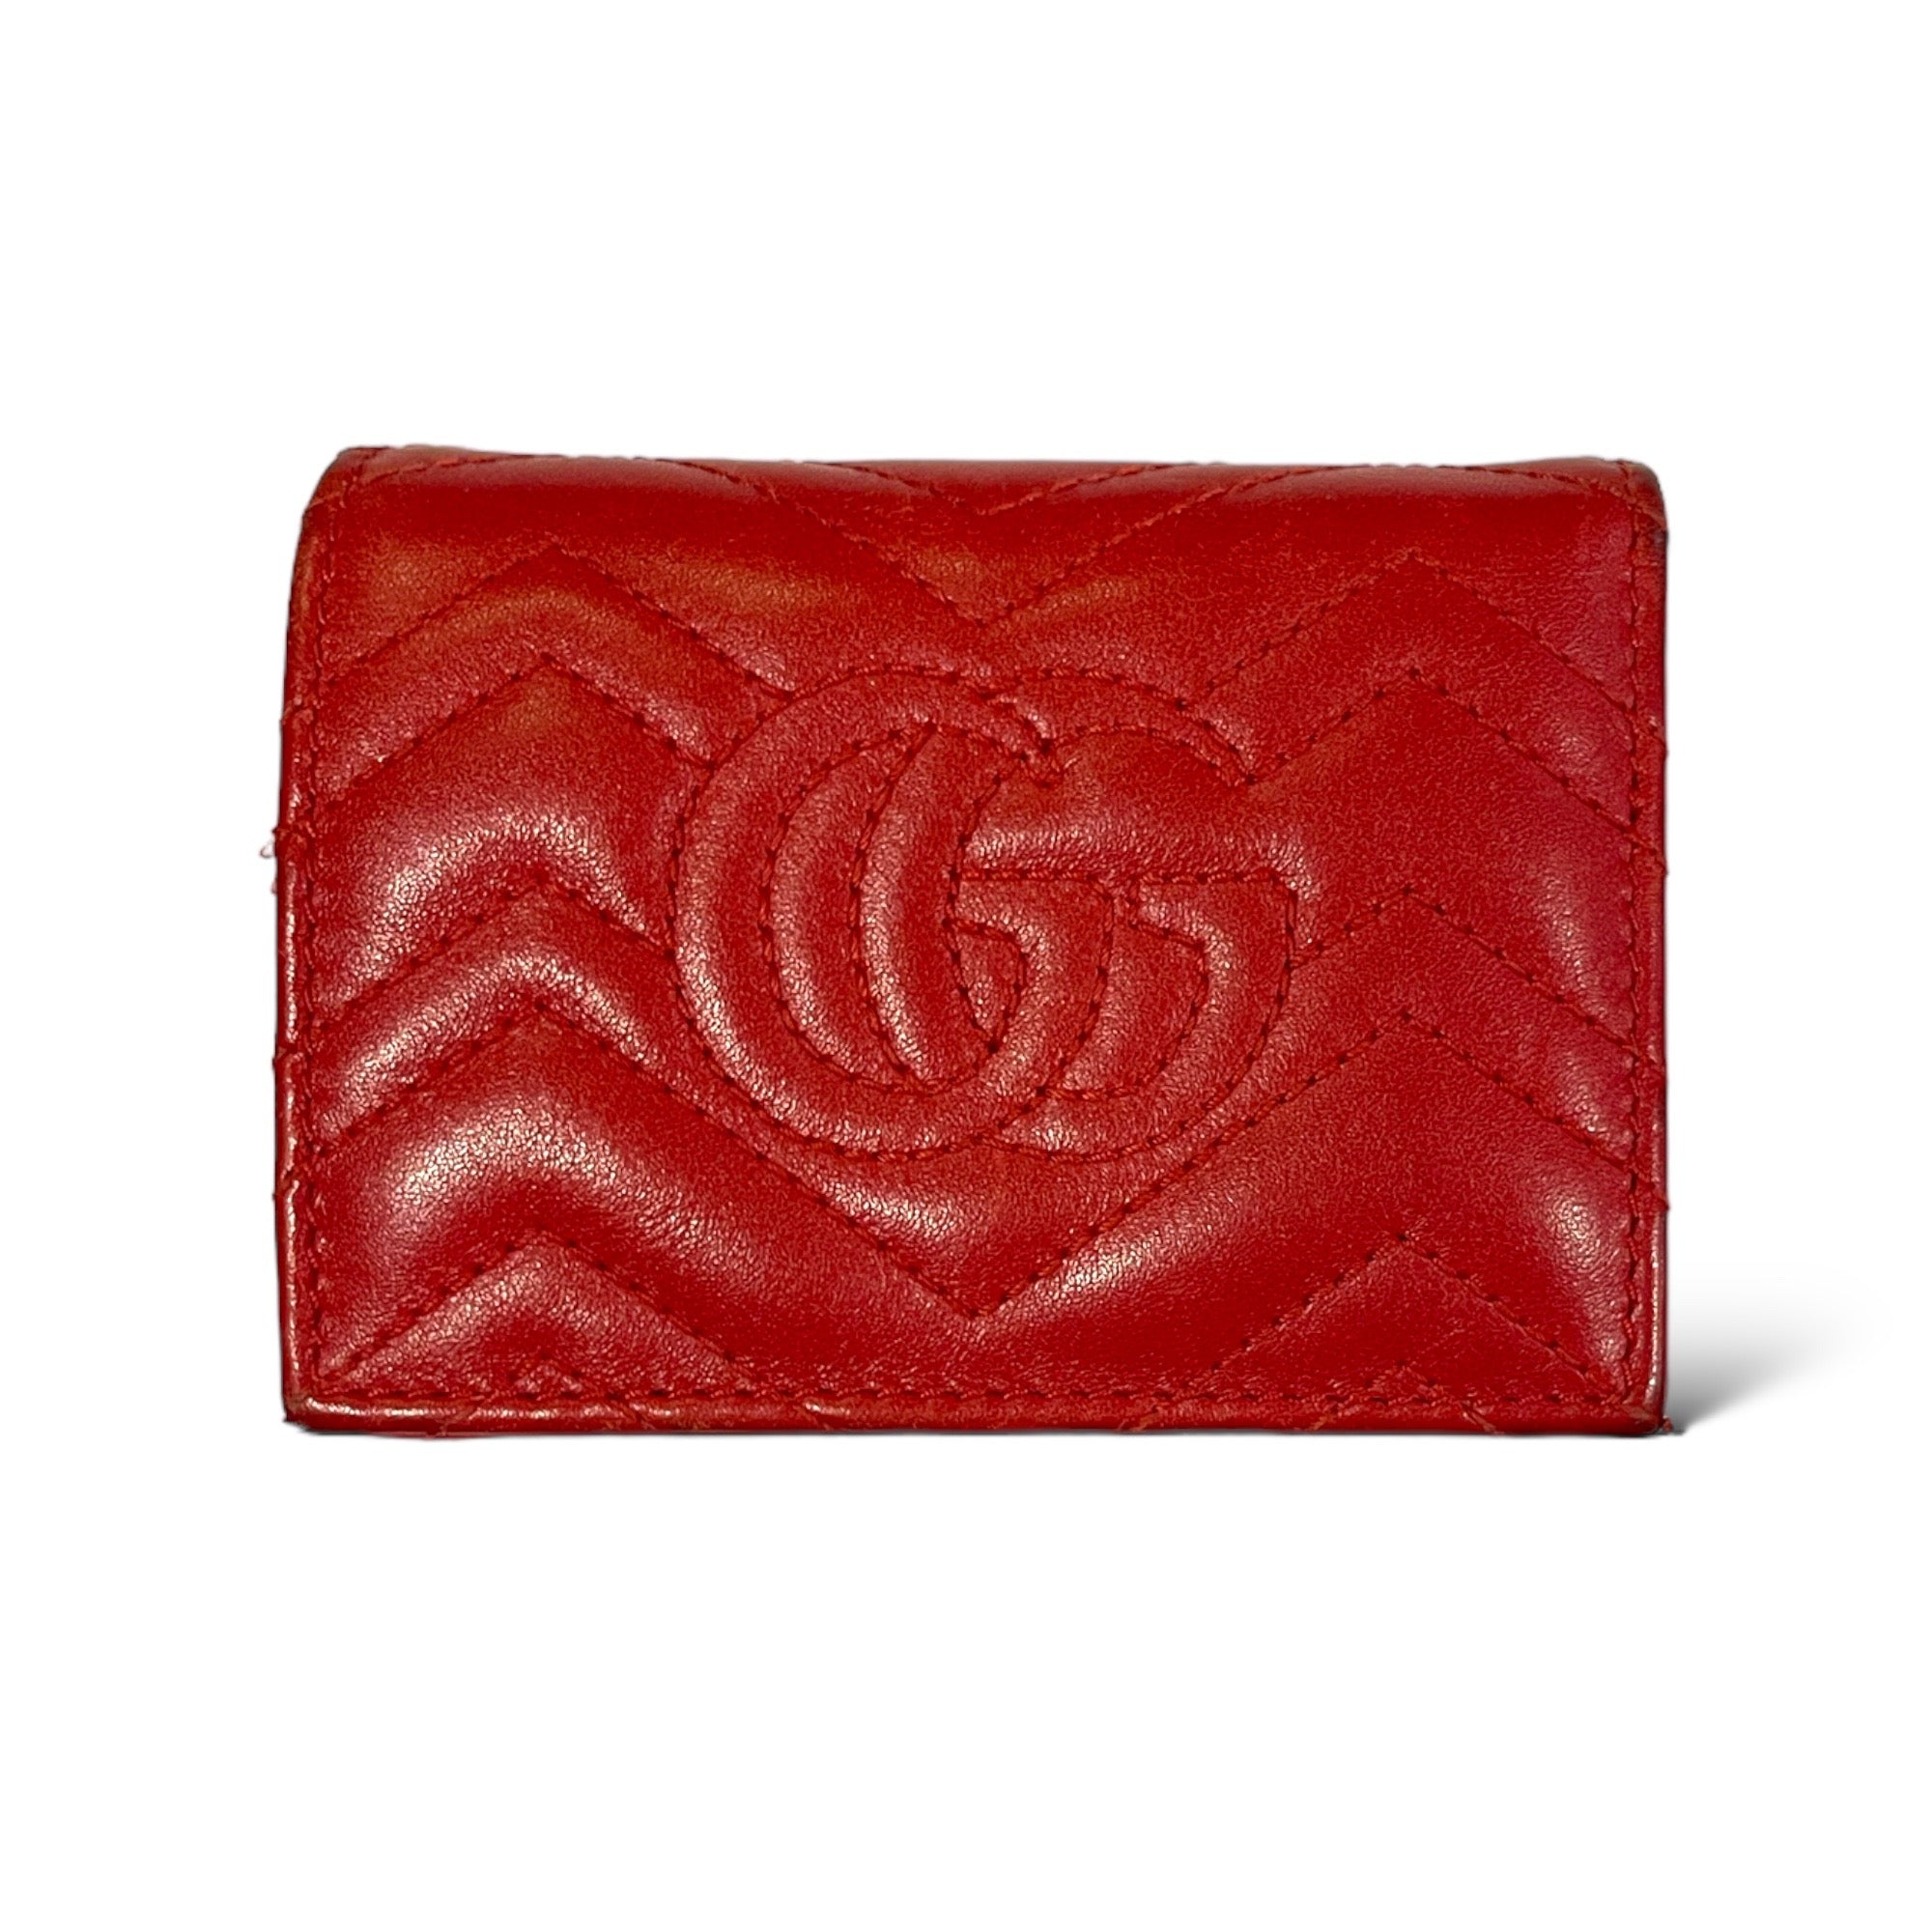 GUCCI GG MARMONT RED MATELASSÉ LEATHER CARD CASE WALLET